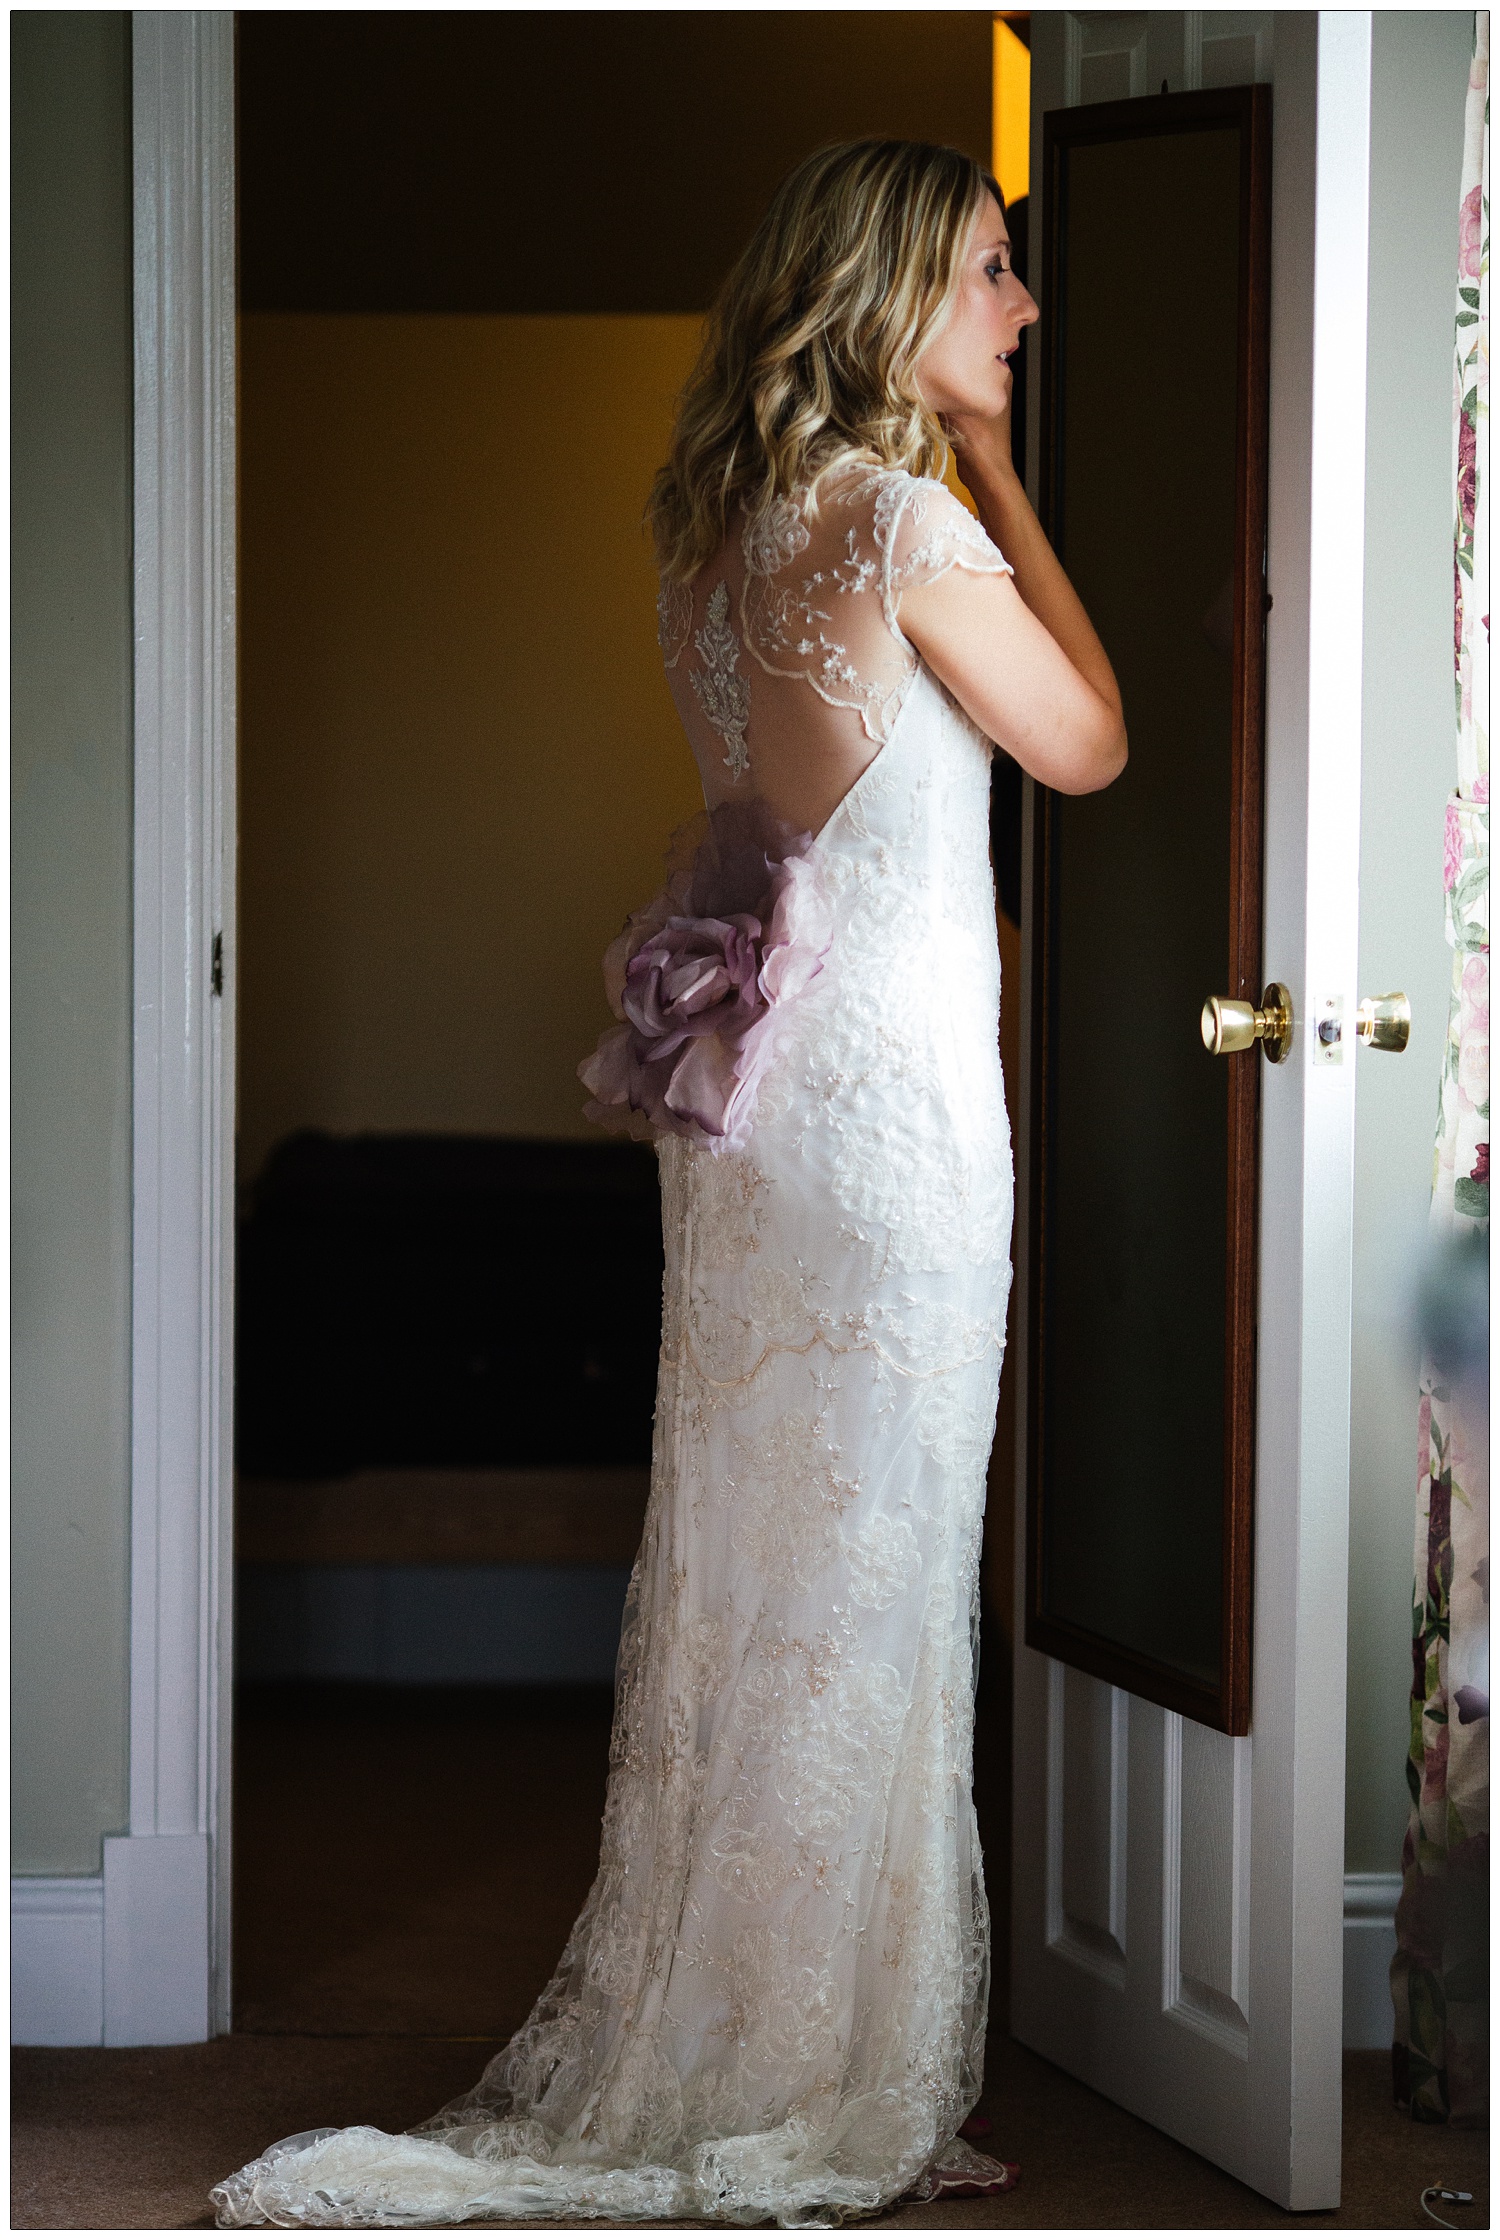 A woman in her wedding dress looks in a long mirror on the back of a door.